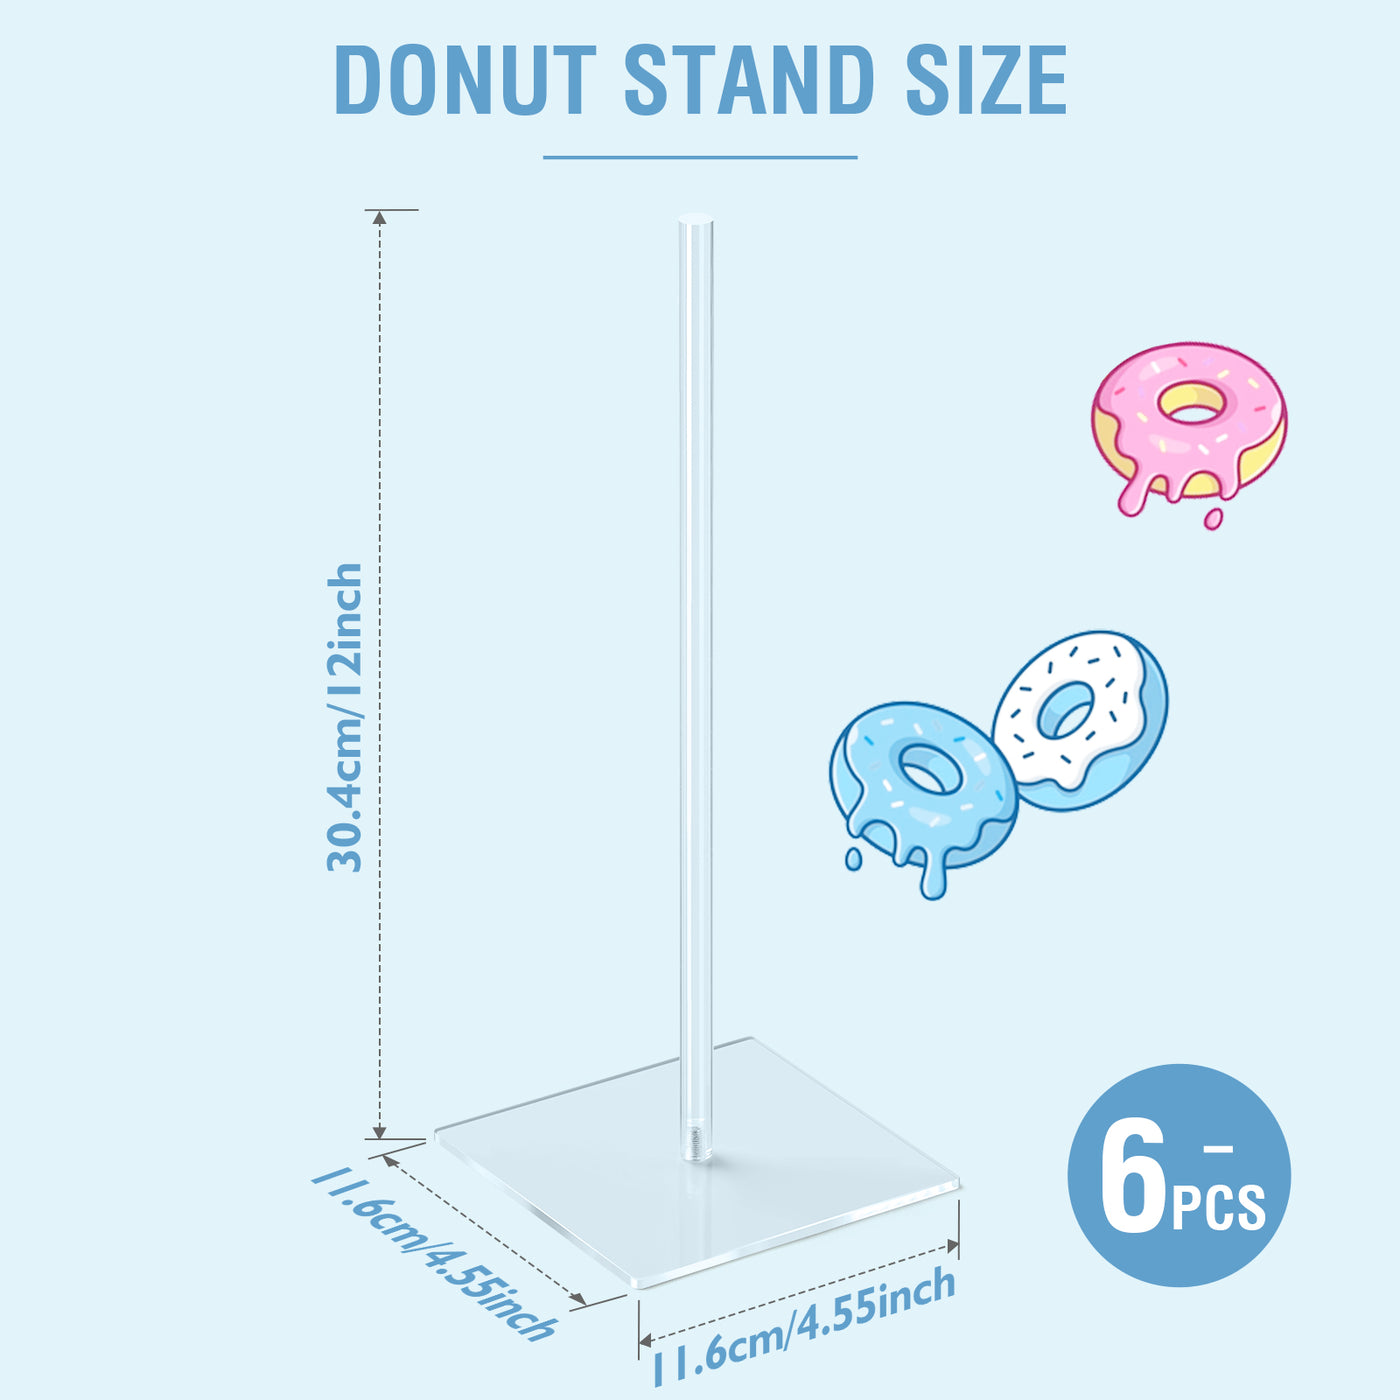 Aredpoook Donut Stand Bagel Stand 6 Pack, Acrylic Doughnut Holder, Clear Donut Display Stand, Bagel Tower Stand, Wall Display Stand Holder for Birthday, Wedding, Baby Shower, Christmas, Party